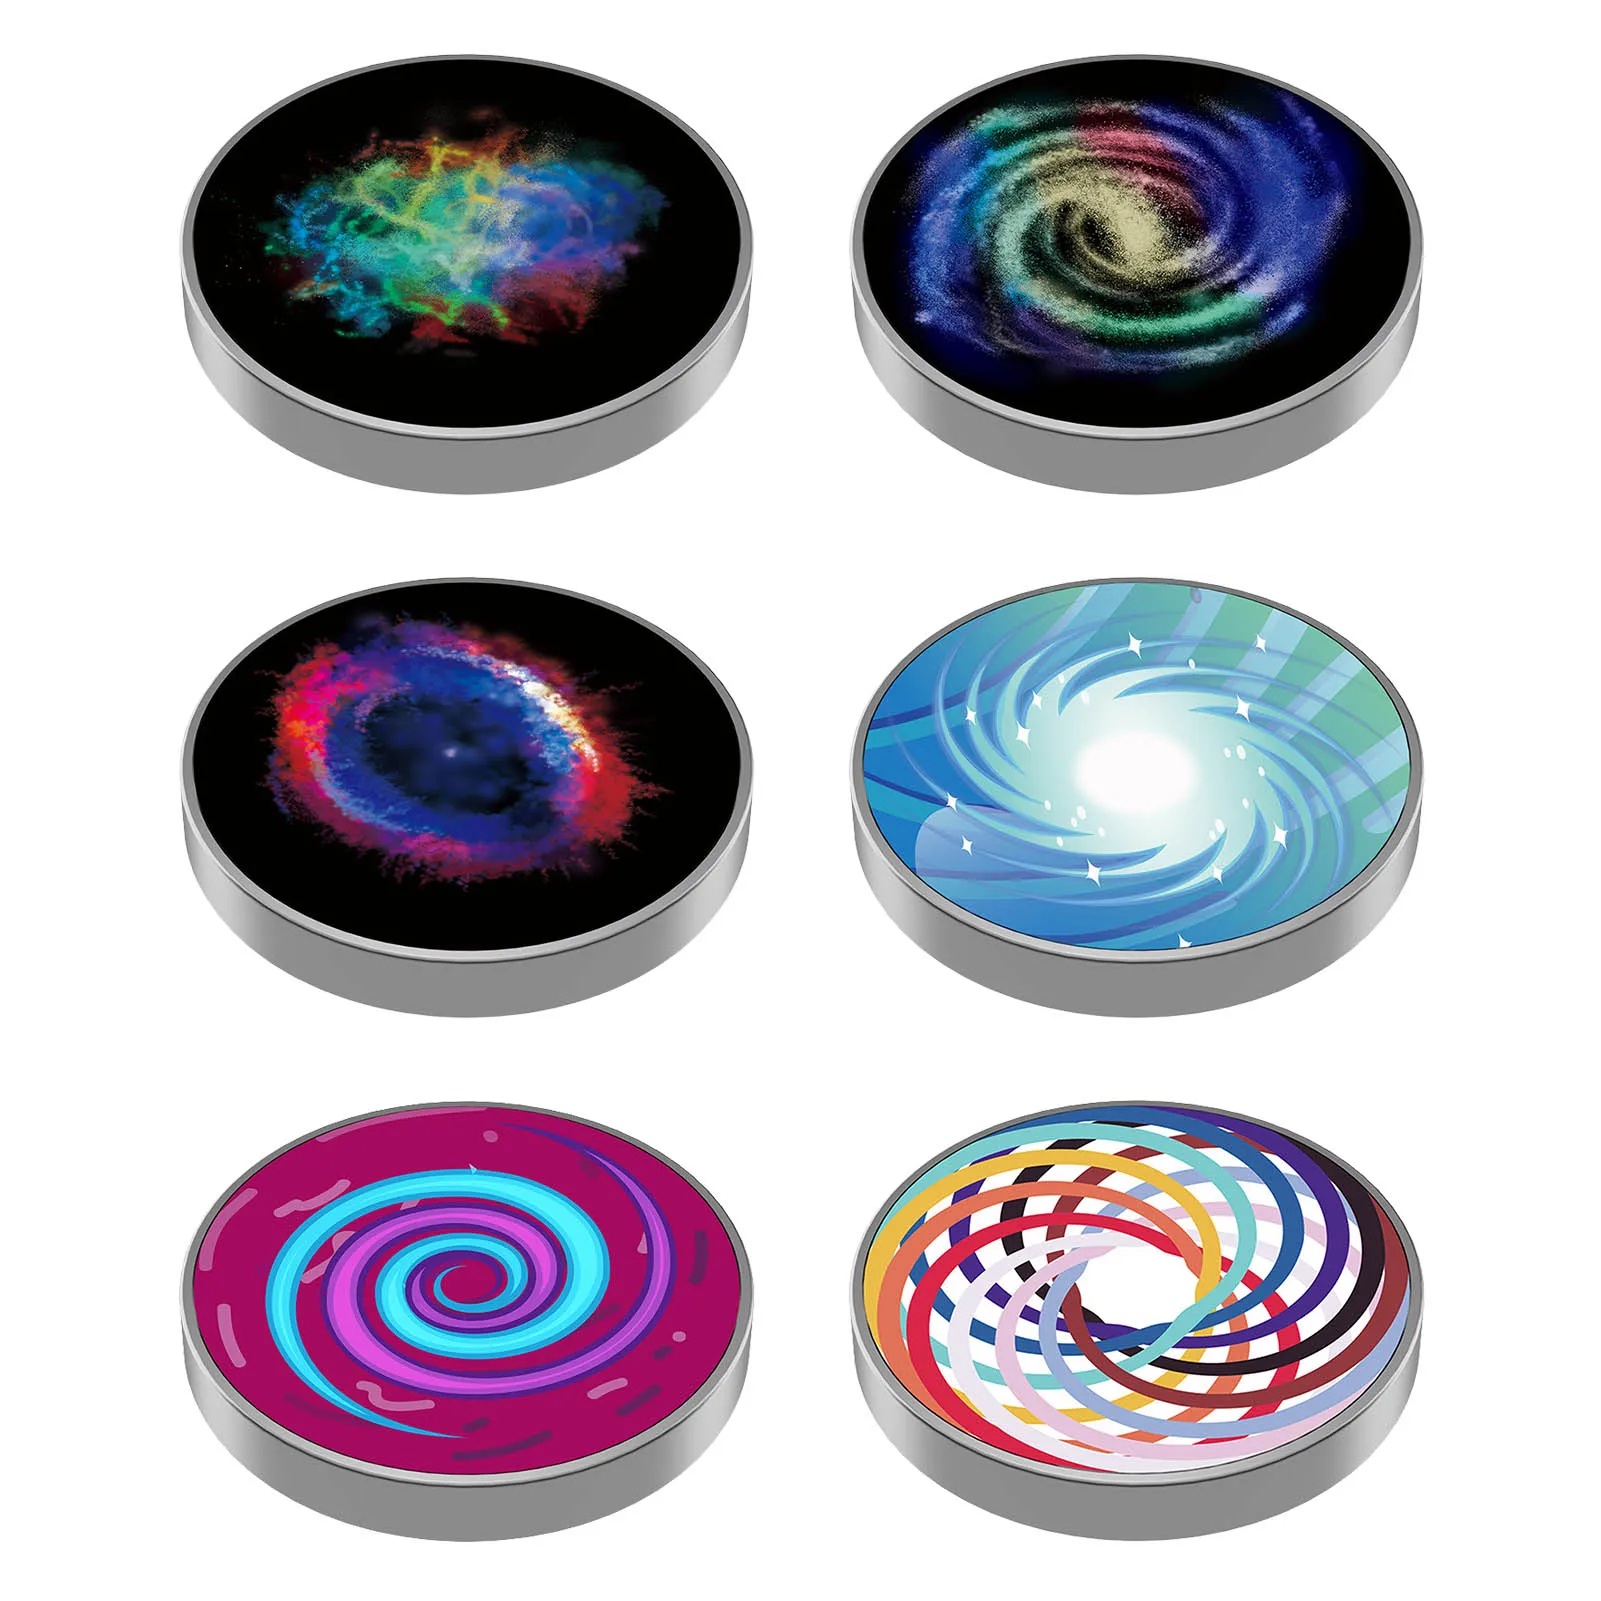 

Round Gyro Galaxy Star Fingertip Gyro Alloy Gyro Spinner Decompression Toy Fidgets Spinner Fidget Toys for Adults Children Gifts